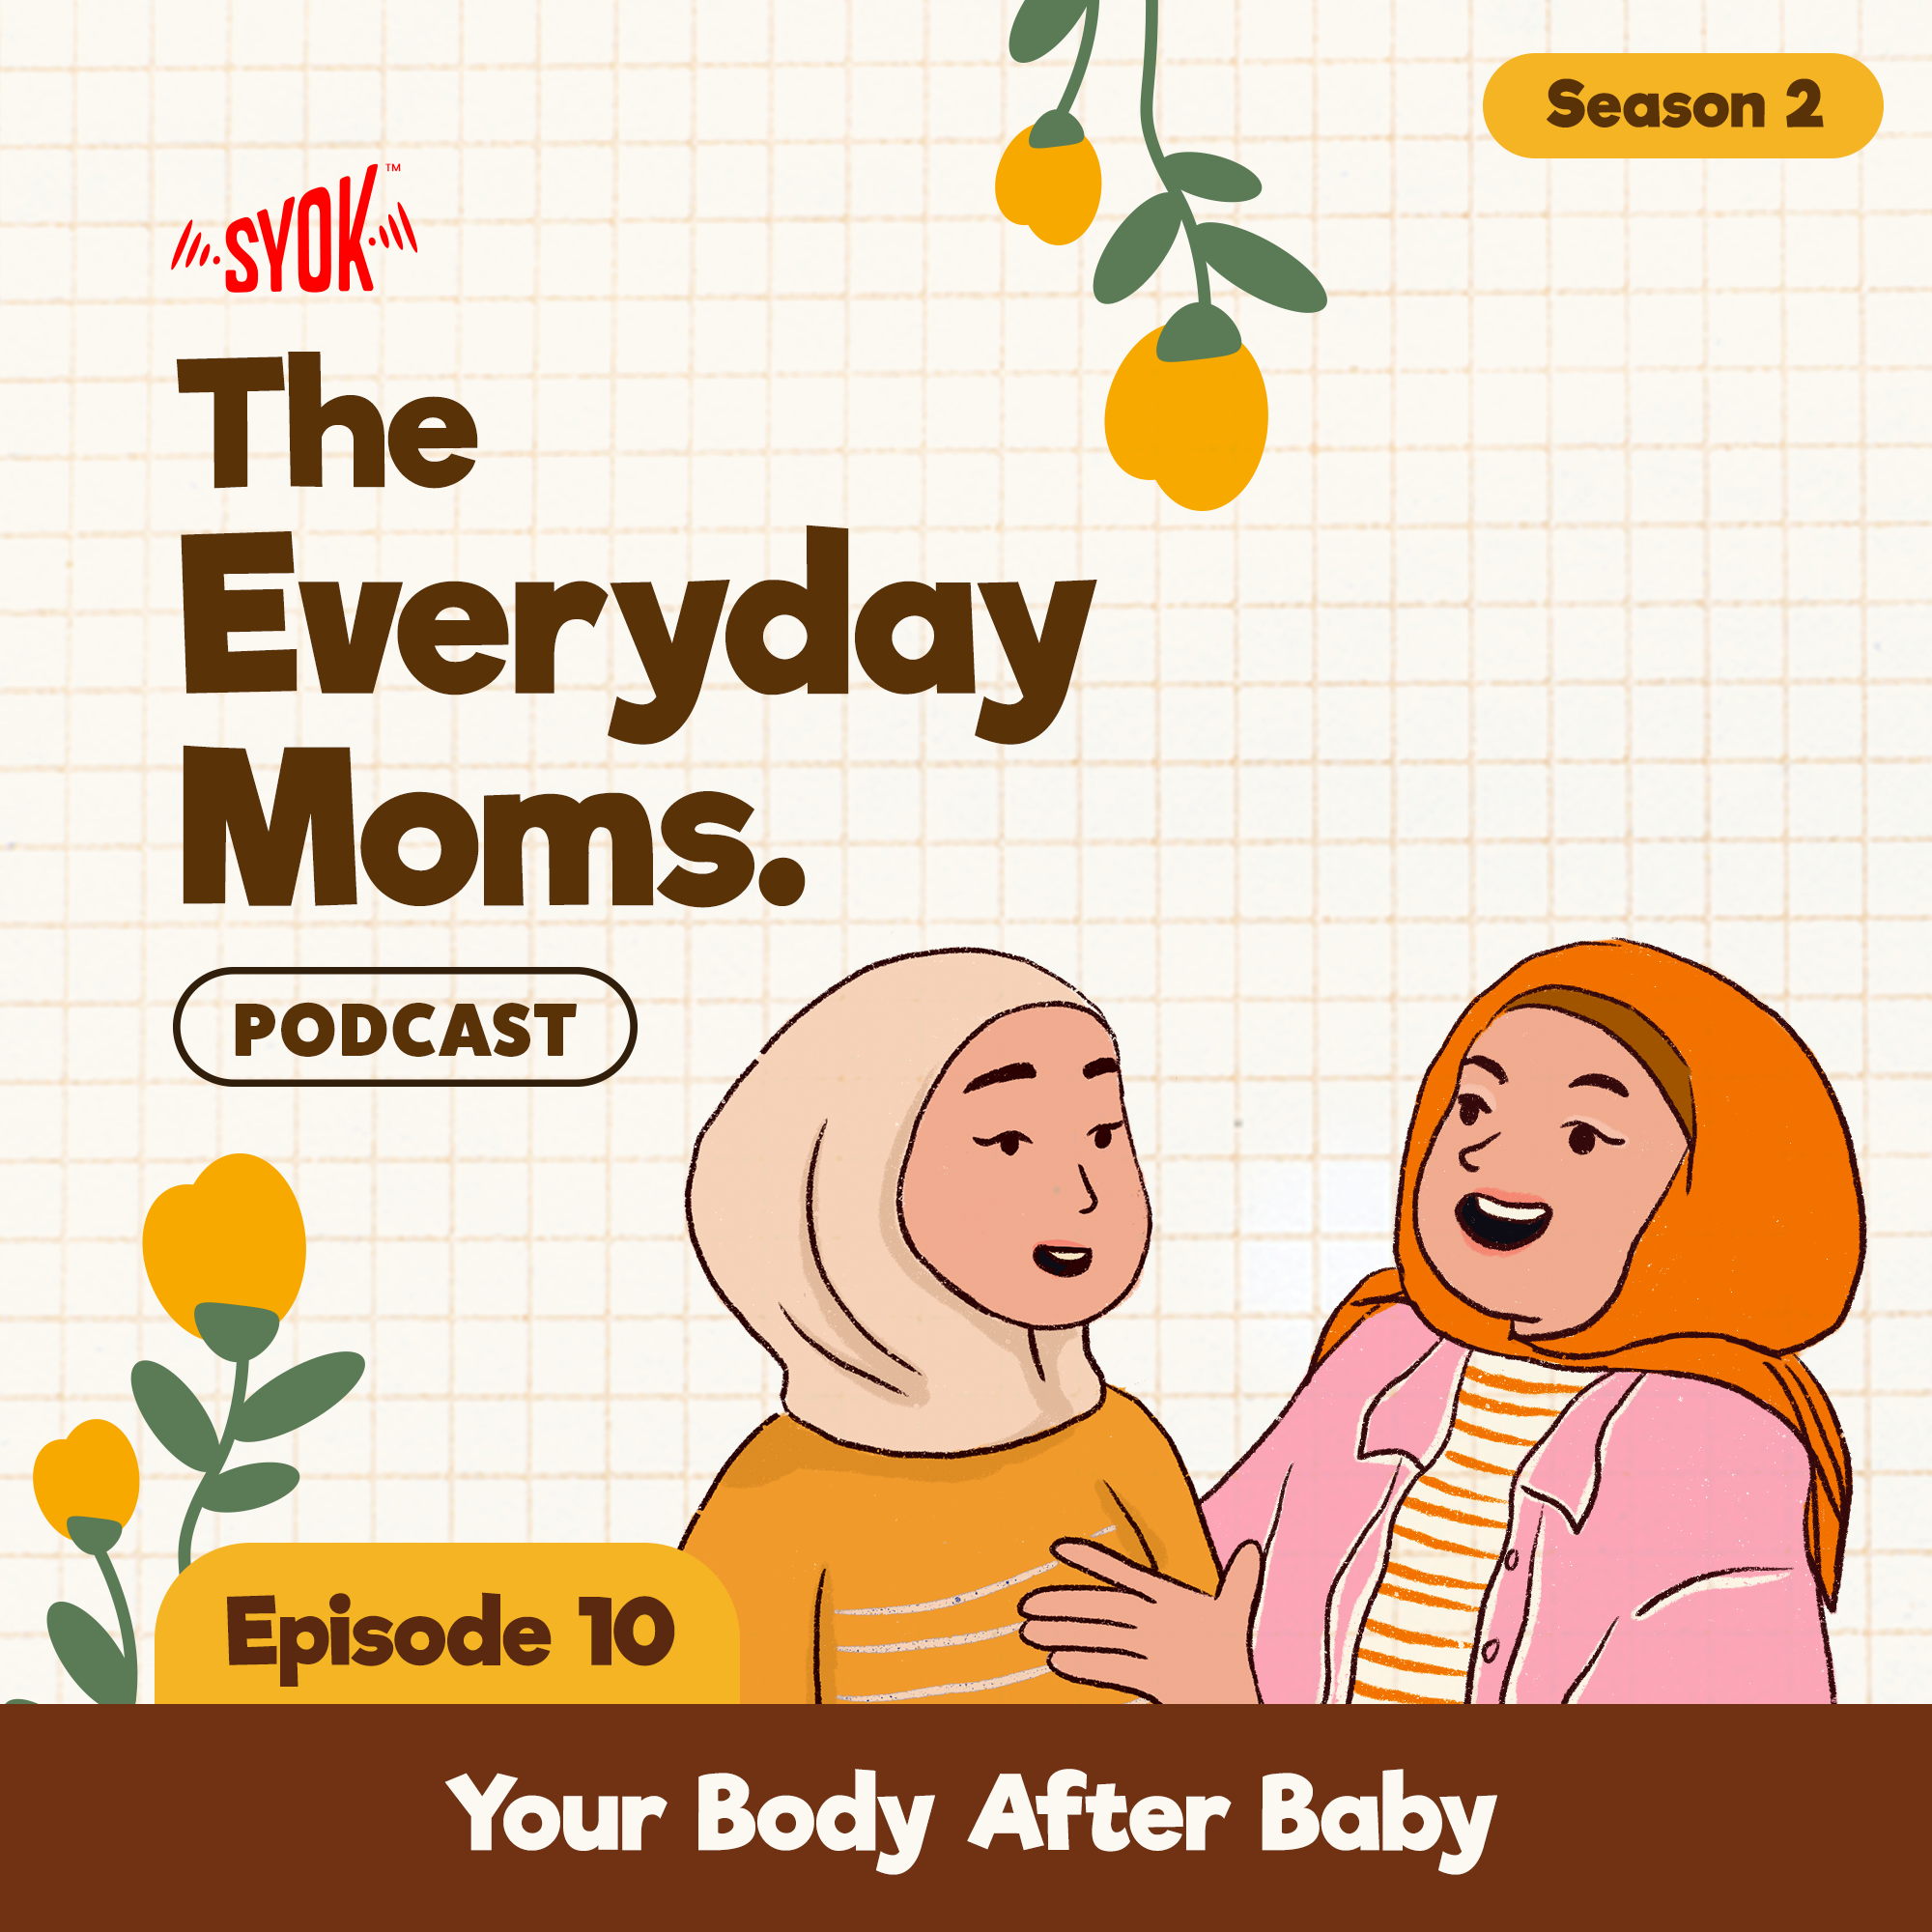 Your Body After Baby | The Everyday Moms S2E10